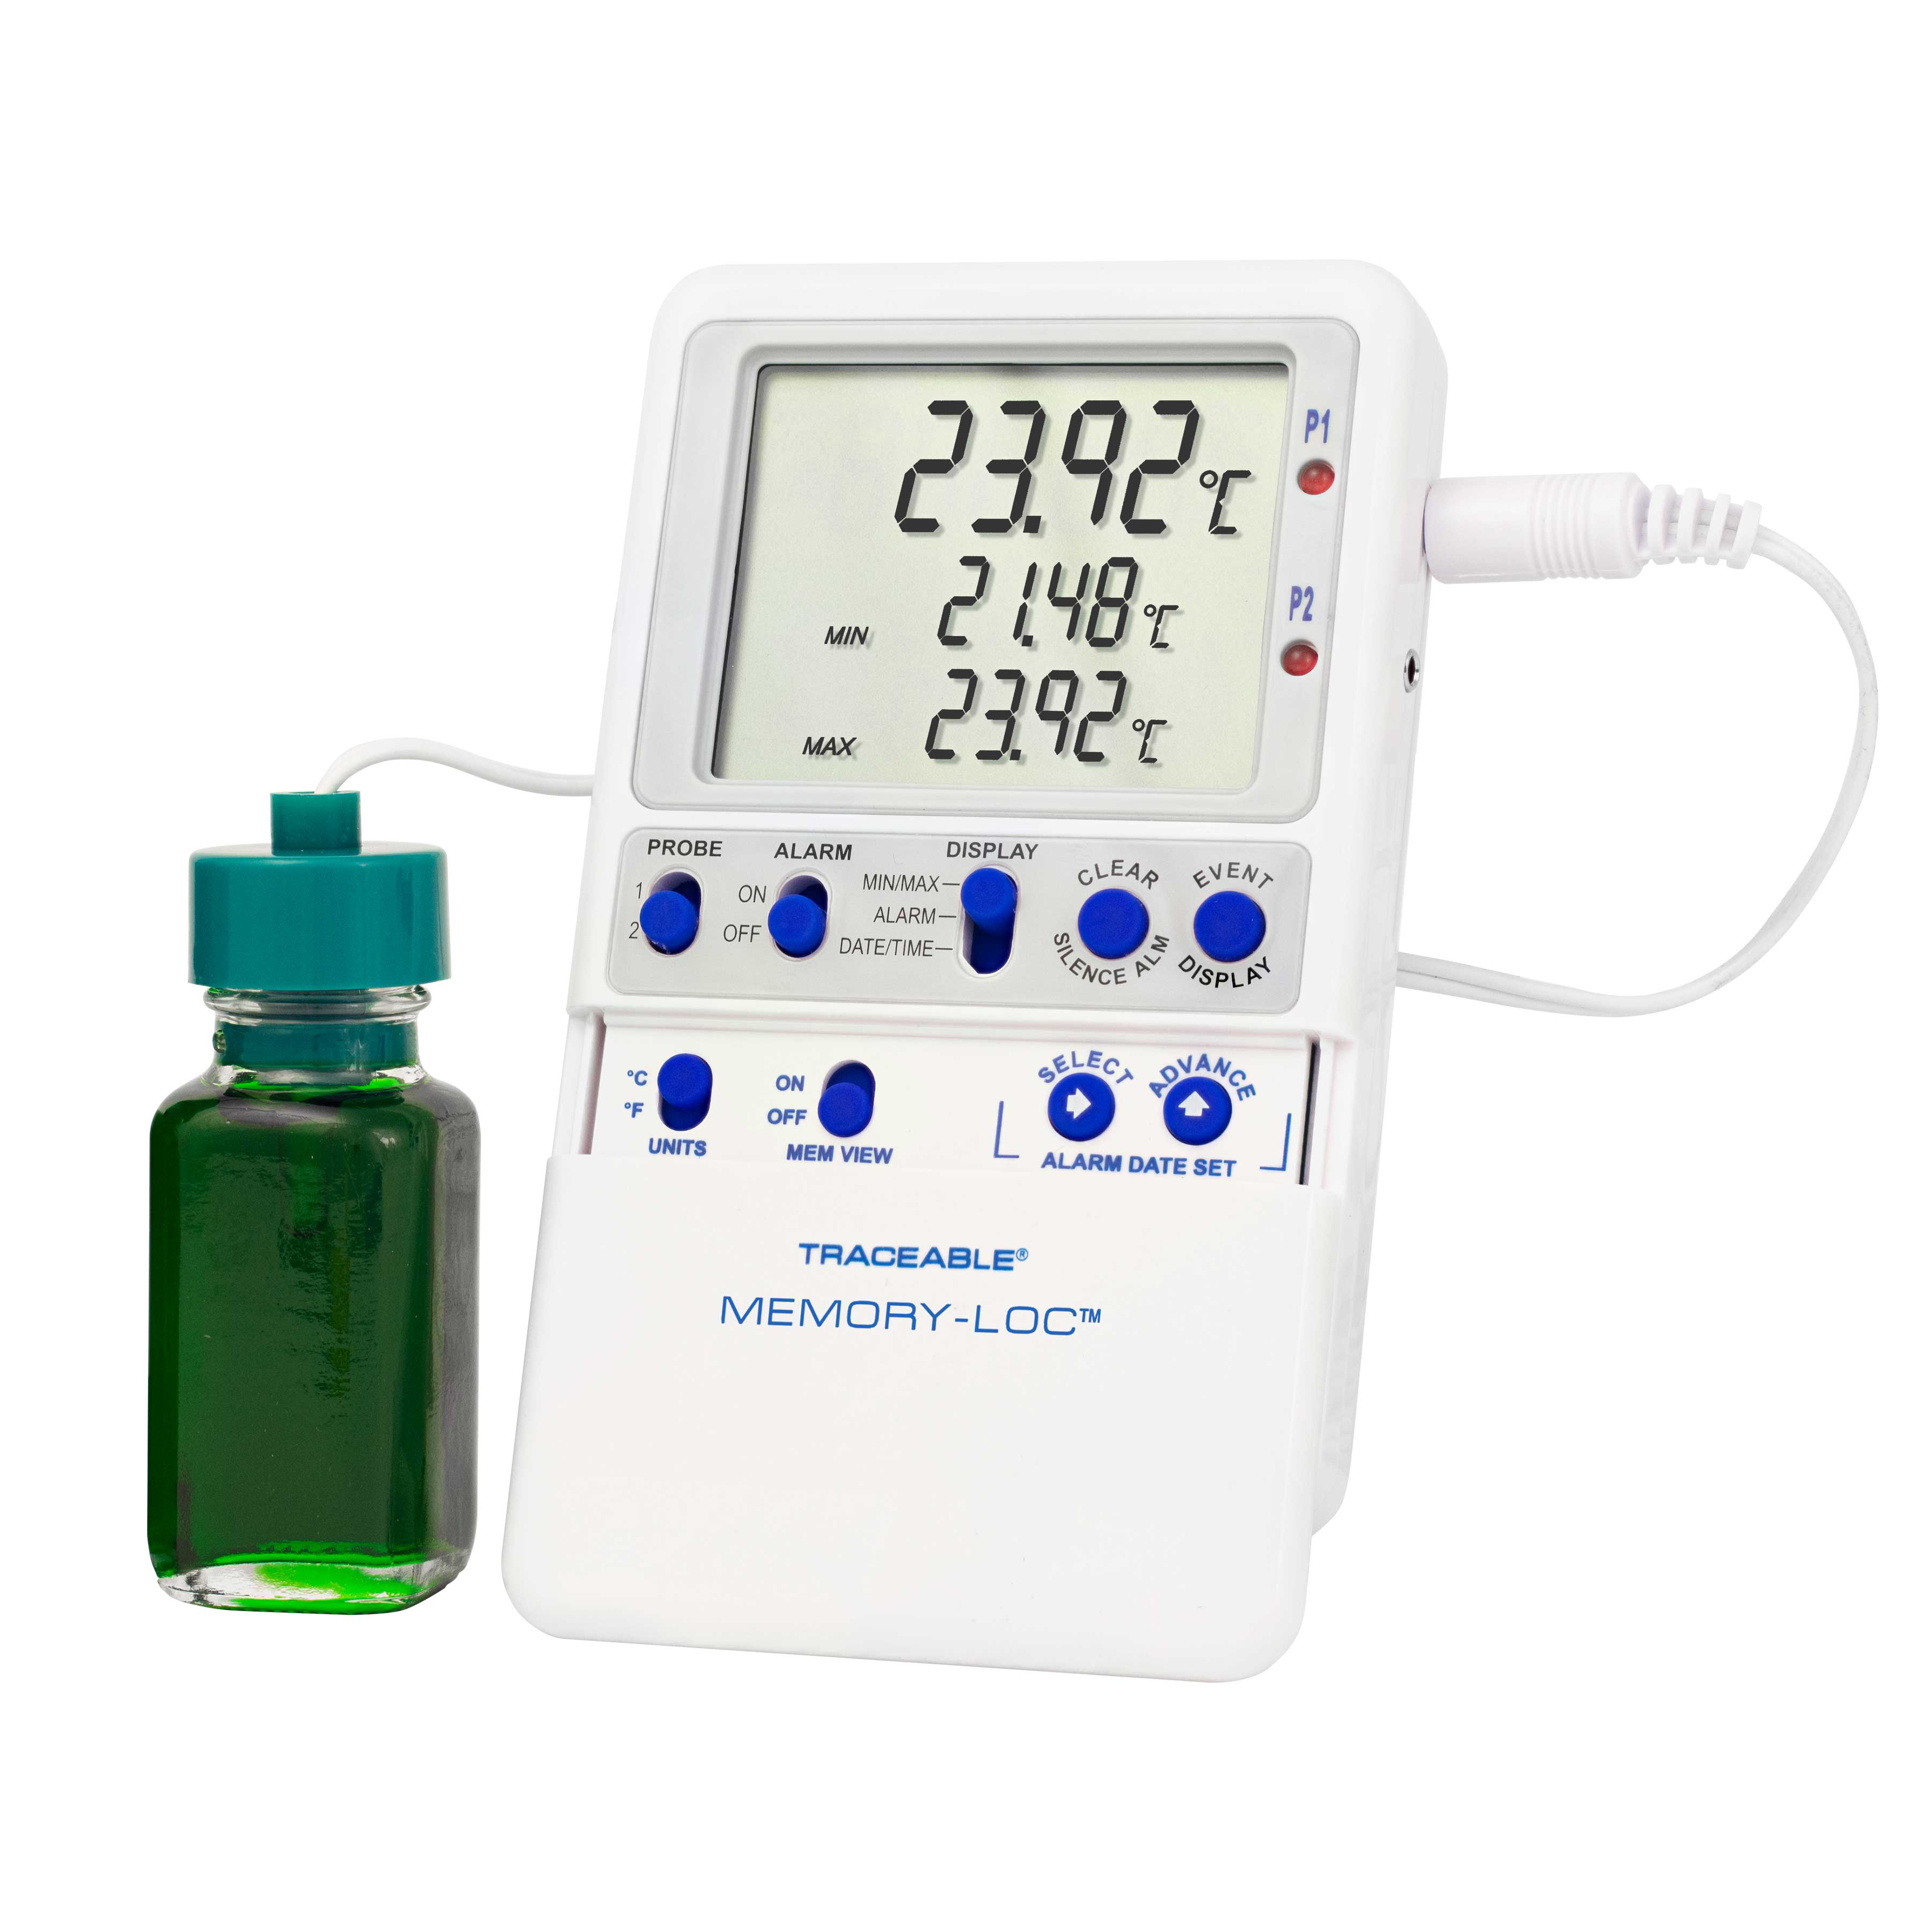 Memory-Loc datalogging digital thermometer. TRACEABLE. Range: –50.00 to 70.00°C. Accuracy: ±0.25°C. Resolution: 0.01°C. Probes: 1 bottle. Application: Refrigerators and Freezers